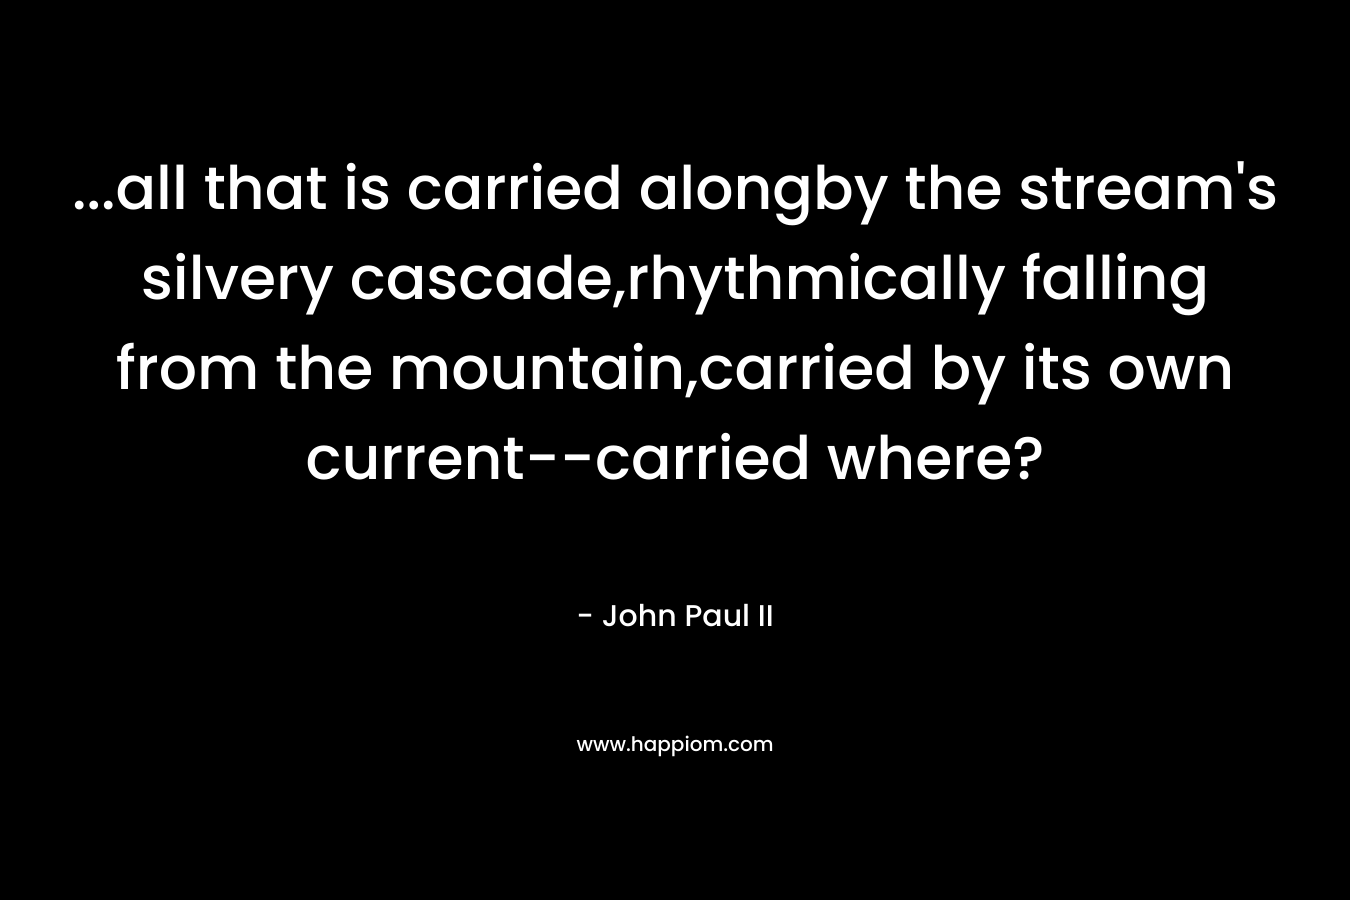 …all that is carried alongby the stream’s silvery cascade,rhythmically falling from the mountain,carried by its own current–carried where? – John Paul II